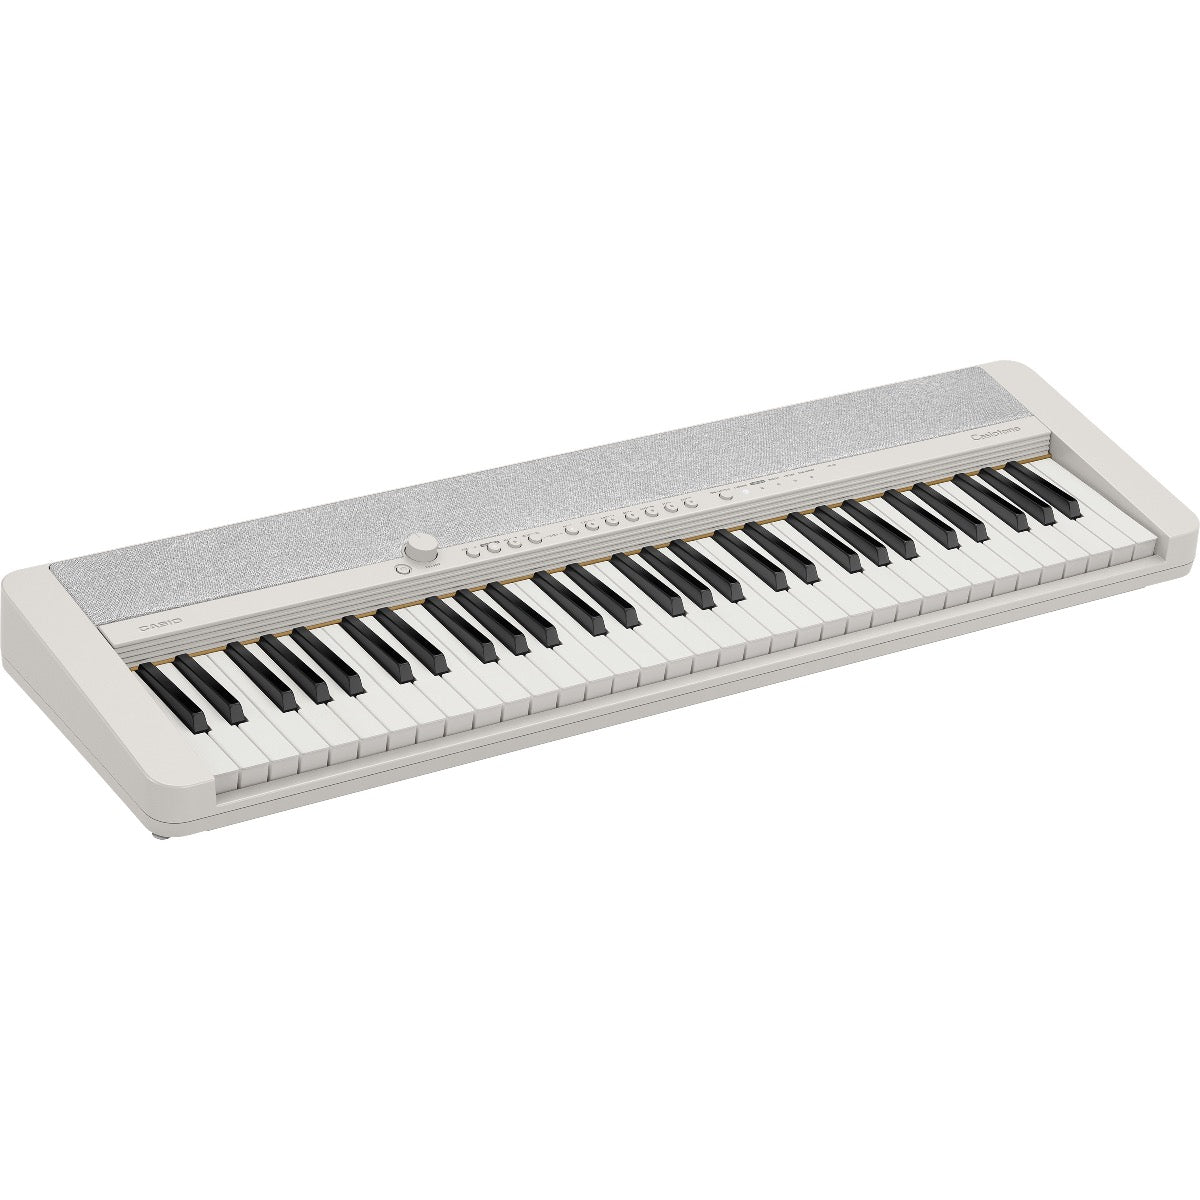 3/4 view of Casio Casiotone CT-S1 Portable Keyboard - White showing top, front and left side